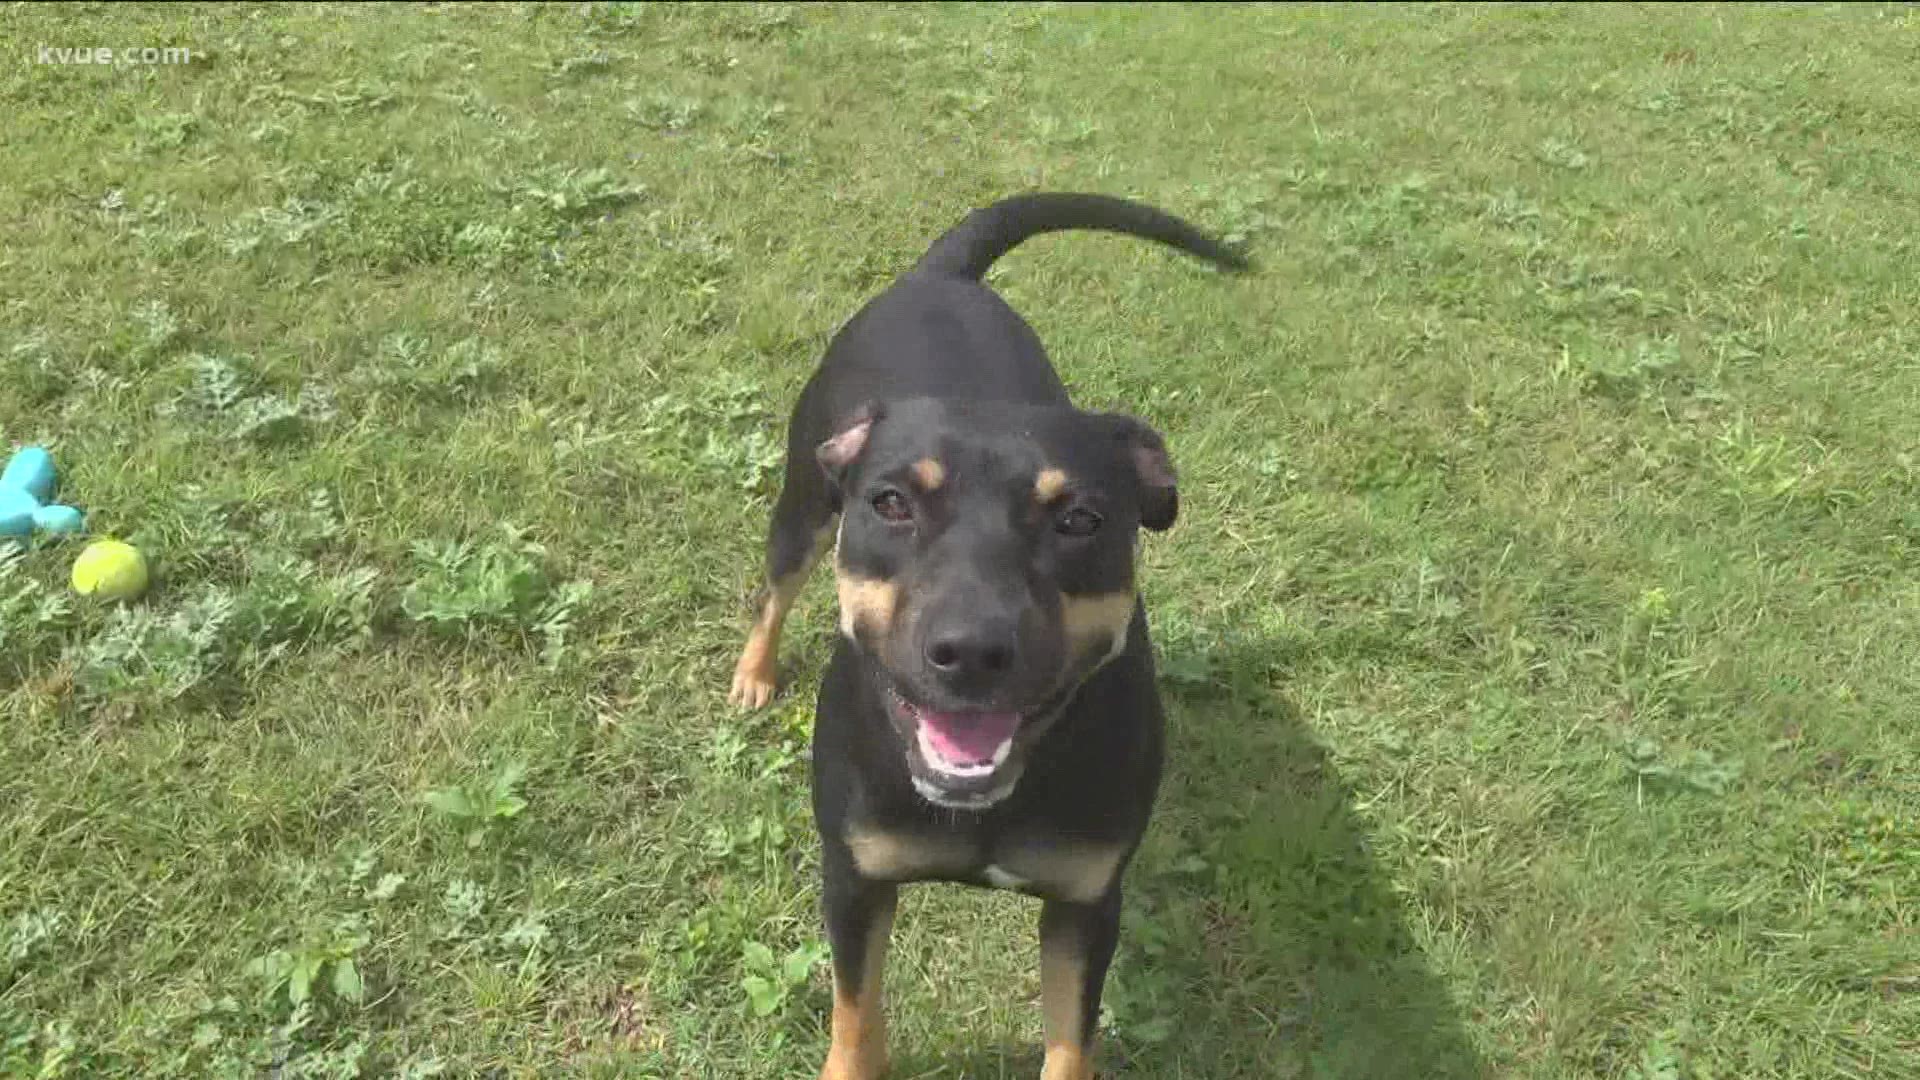 Sierra is a one-year-old pup with a ton of energy. She loves to play fetch and to go for walks.